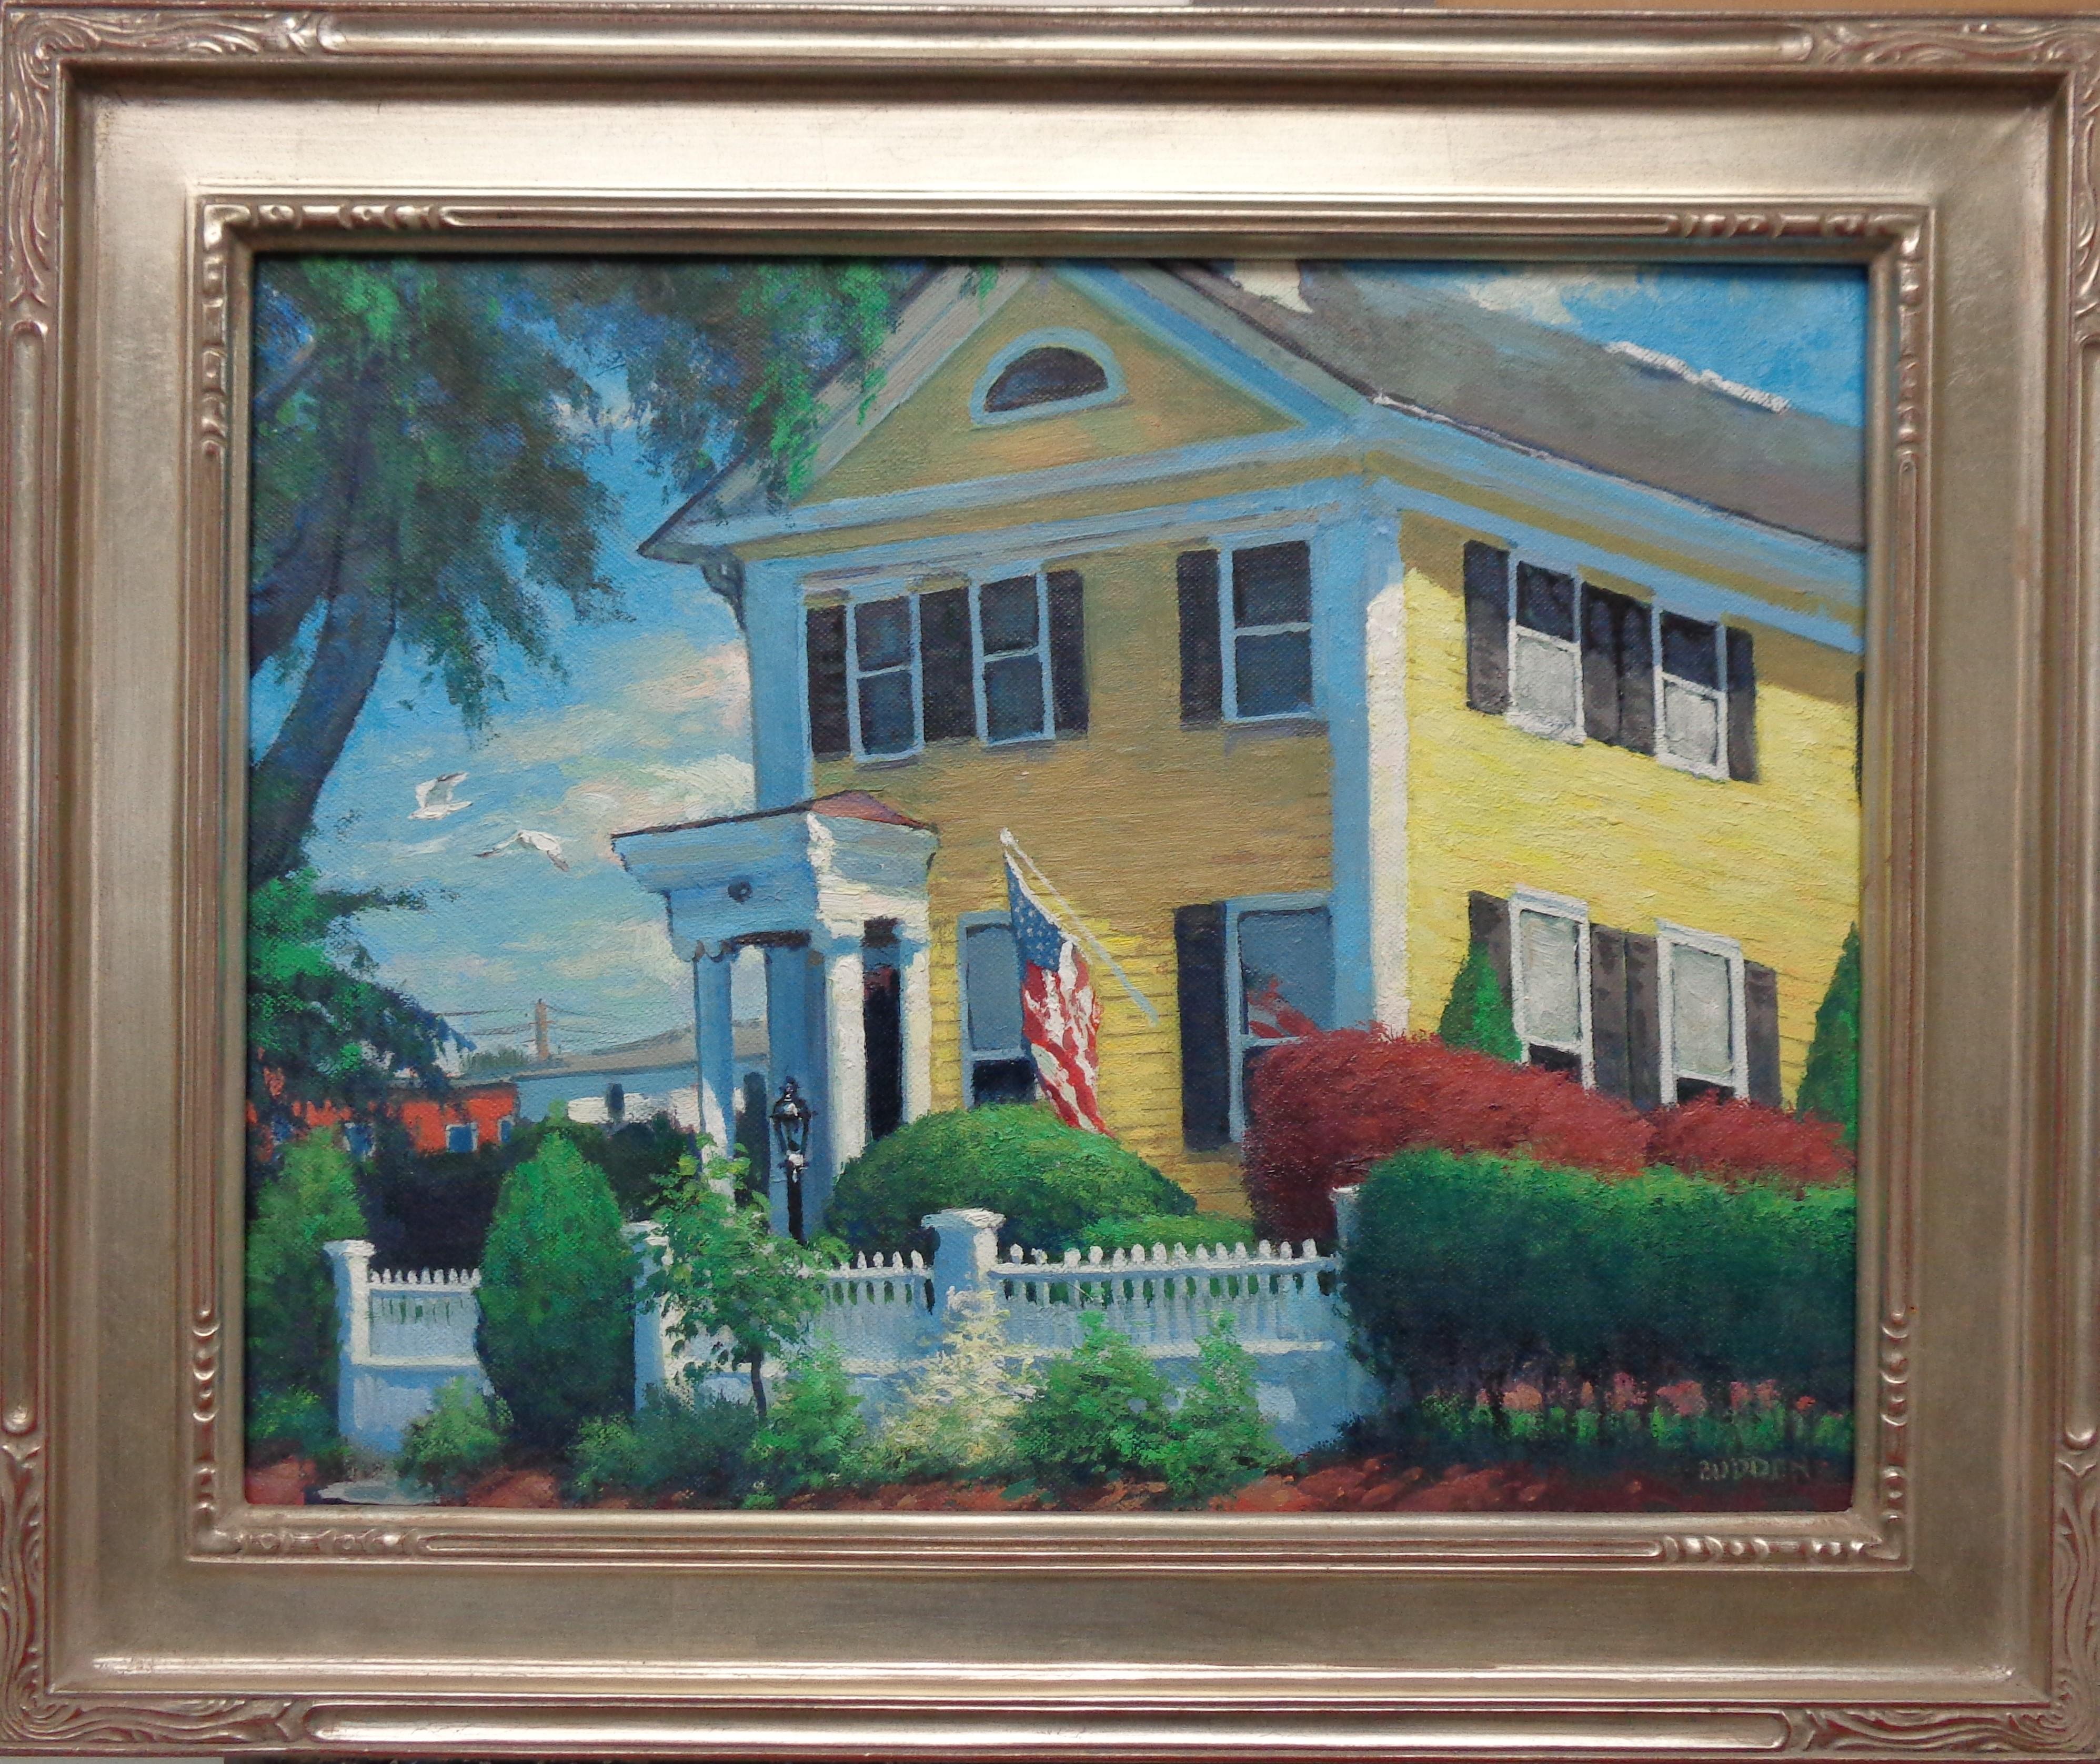 The Captains House is a beautiful  oil painting on panel by award winning contemporary artist Michael Budden that showcases the John Havens sawyer House, 1835 located in Mystic Ct. I started this painting on site back in 2018 at the Mystic Seaports